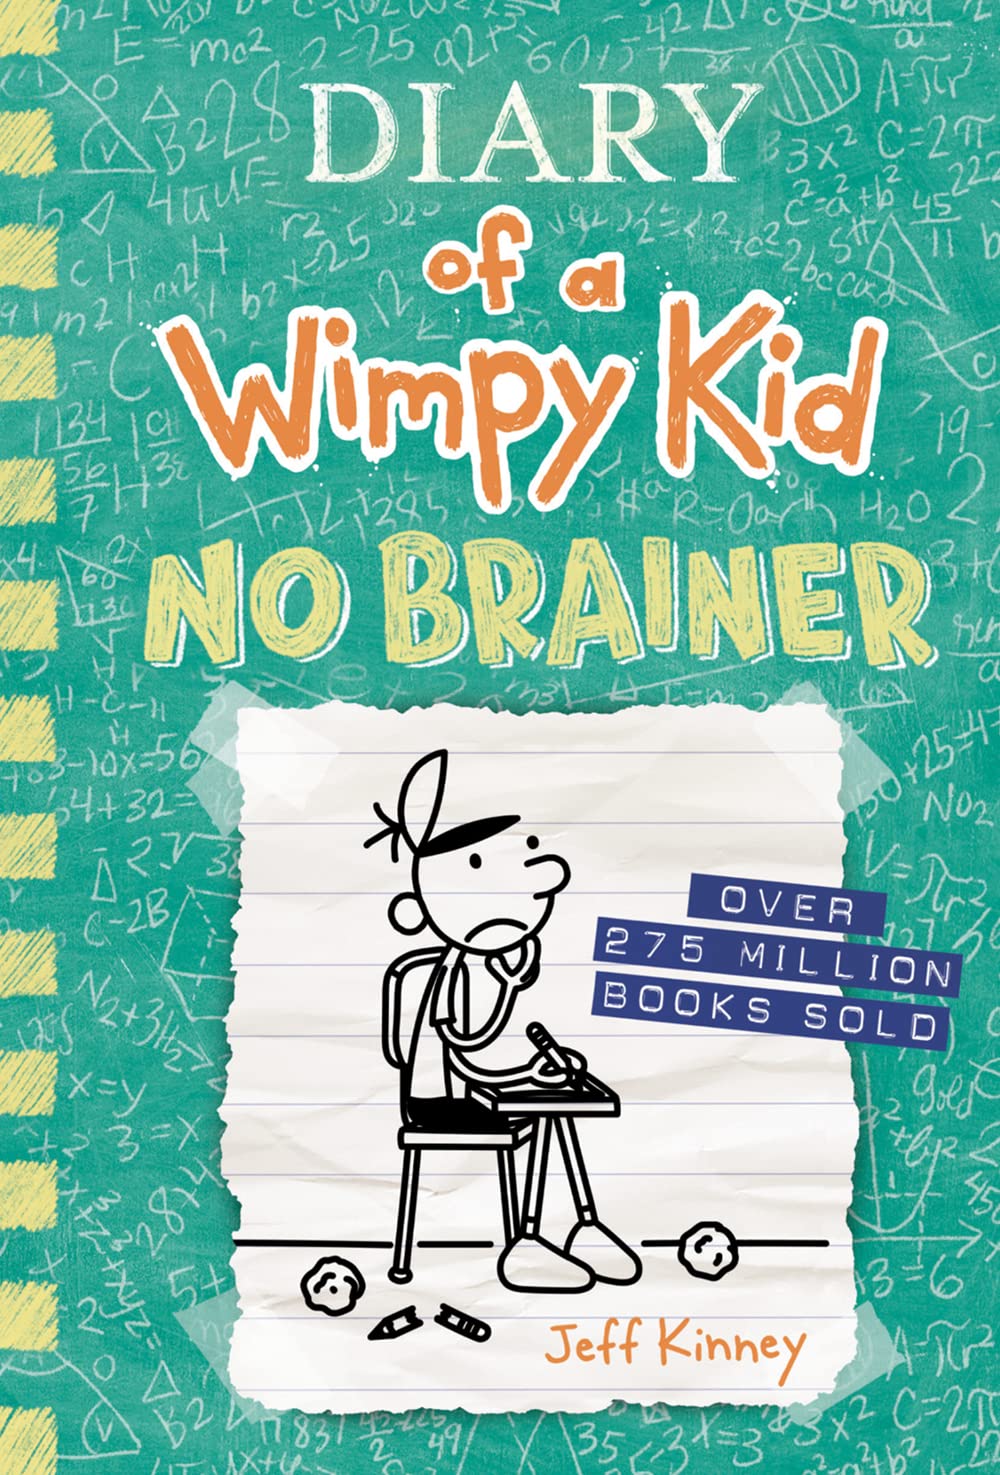 Diary of a Wimpy Kid: No Brainer | Diary of a Wimpy Kid Wiki | Fandom